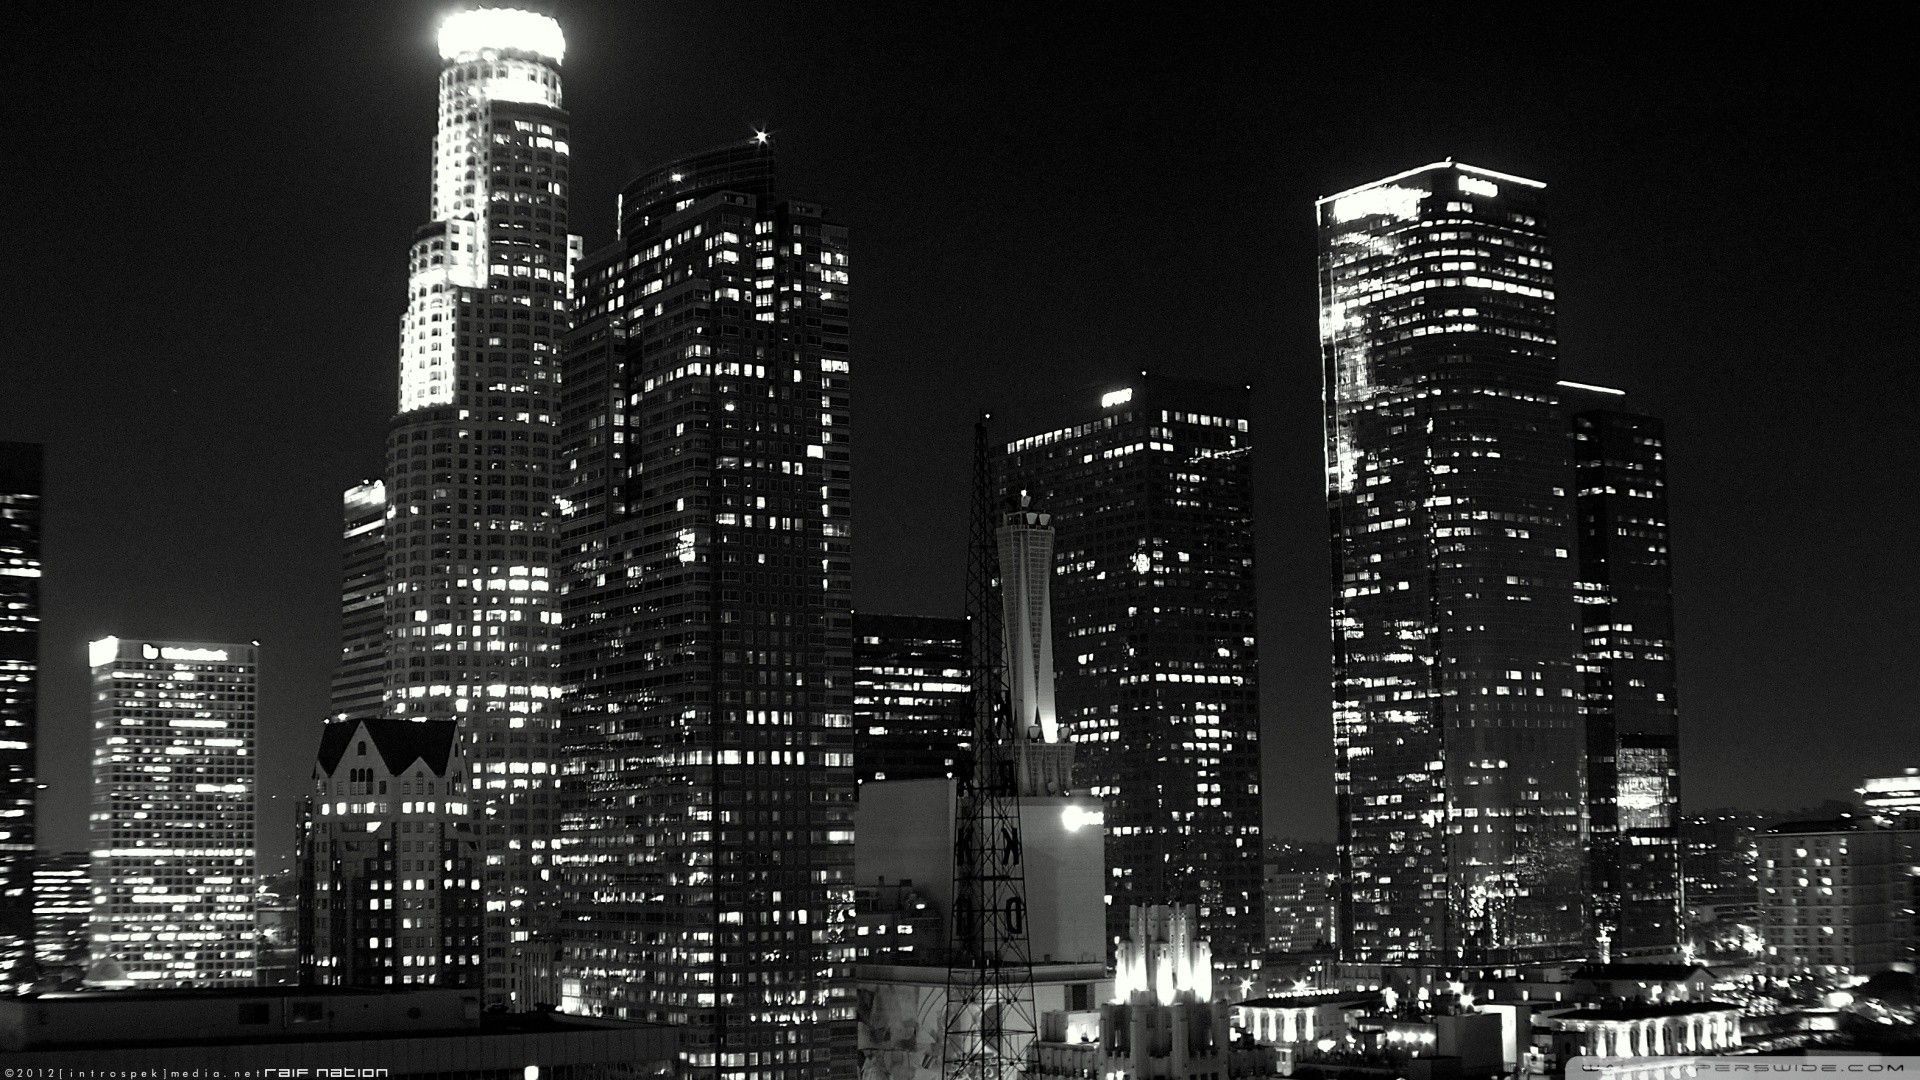 Wallpapers of Los Angeles or named L.A - known for Hollywood